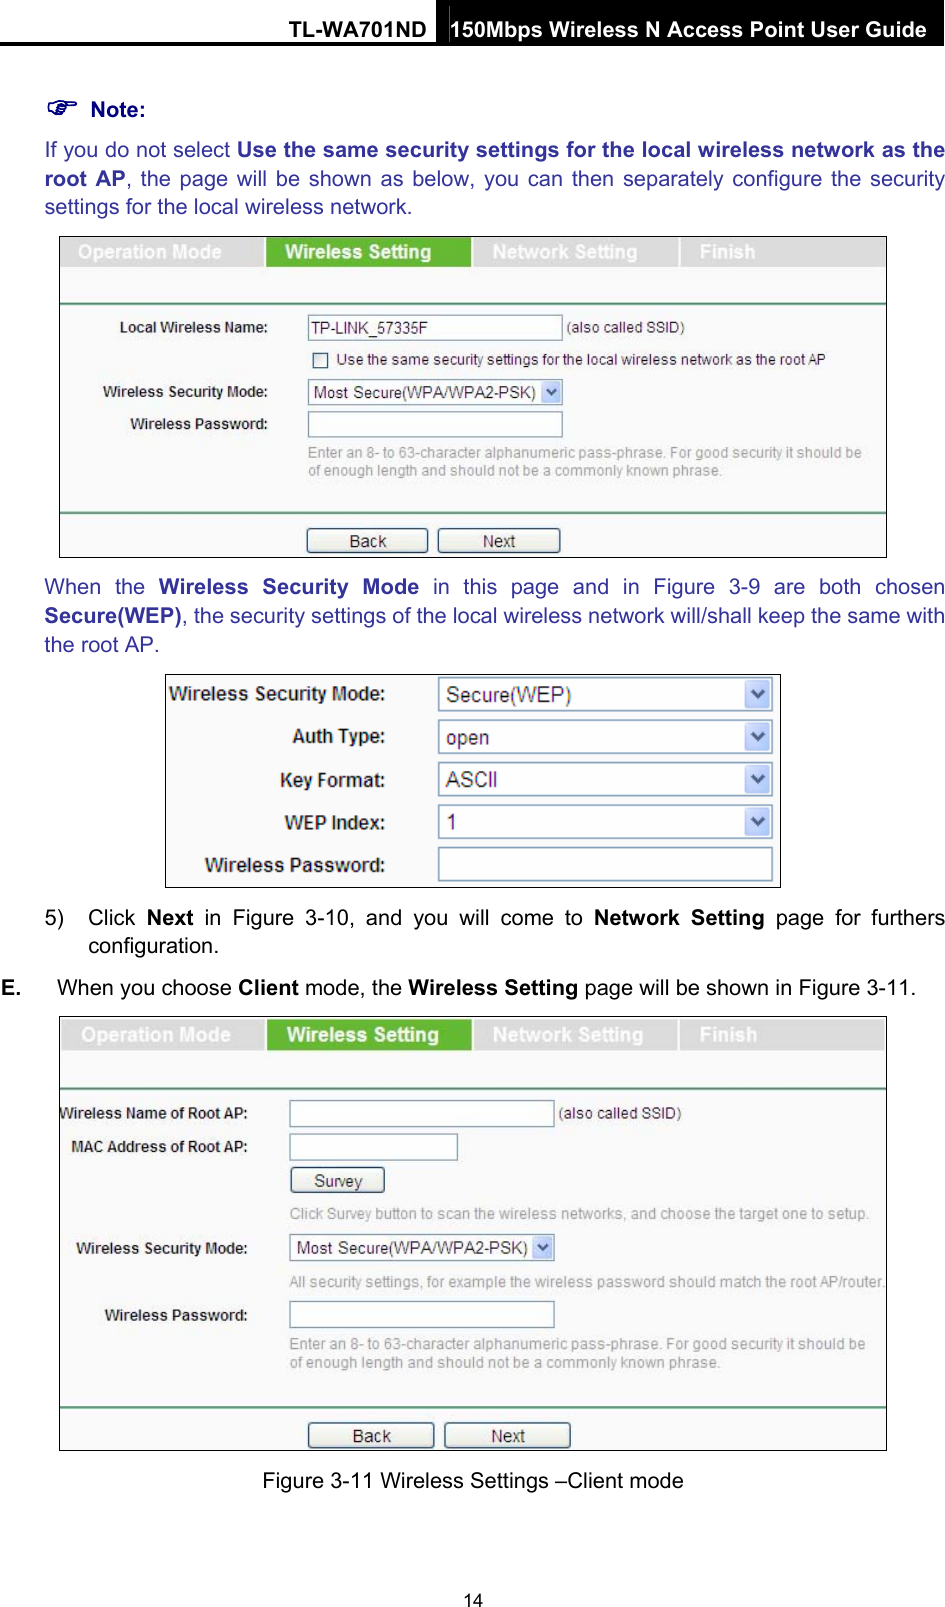 TL-WA701ND 150Mbps Wireless N Access Point User Guide ) Note: If you do not select Use the same security settings for the local wireless network as the root AP, the page will be shown as below, you can then separately configure the security settings for the local wireless network.  When the Wireless Security Mode in this page and in Figure 3-9 are both chosen Secure(WEP), the security settings of the local wireless network will/shall keep the same with the root AP.  5) Click Next in Figure 3-10, and you will come to Network Setting page for furthers configuration. E.  When you choose Client mode, the Wireless Setting page will be shown in Figure 3-11.  Figure 3-11 Wireless Settings –Client mode 14 